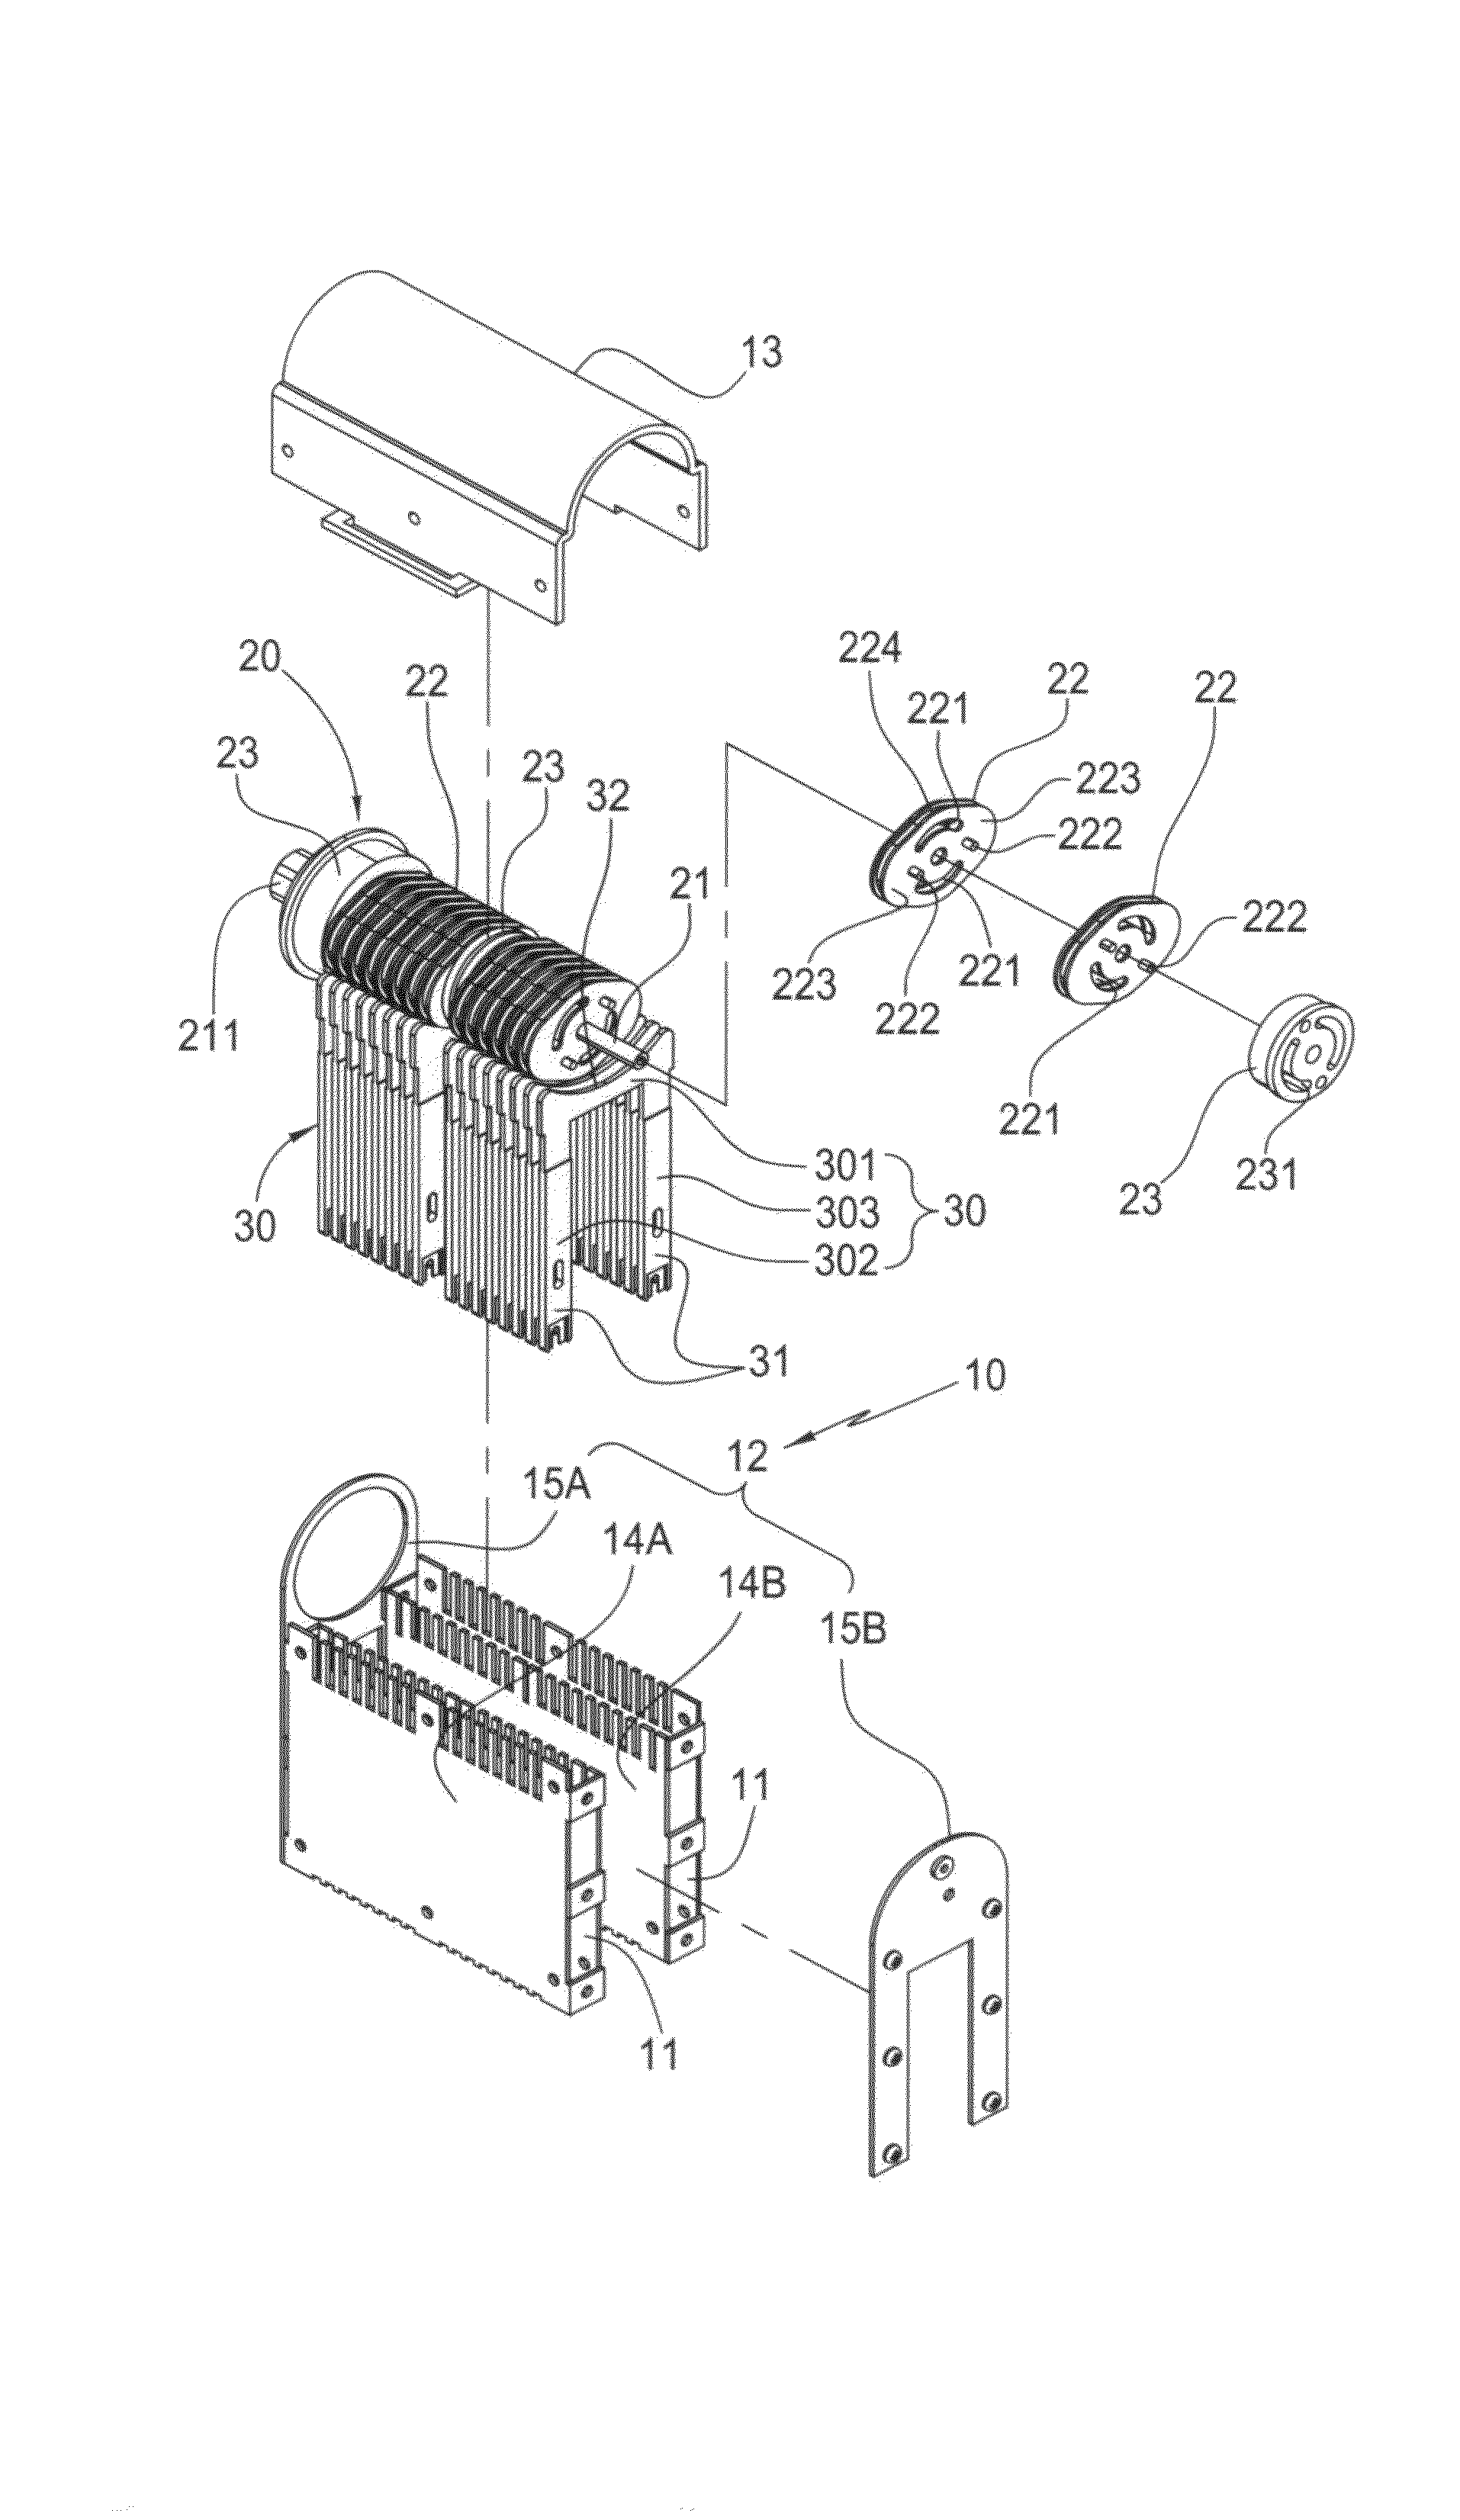 Punch-down device